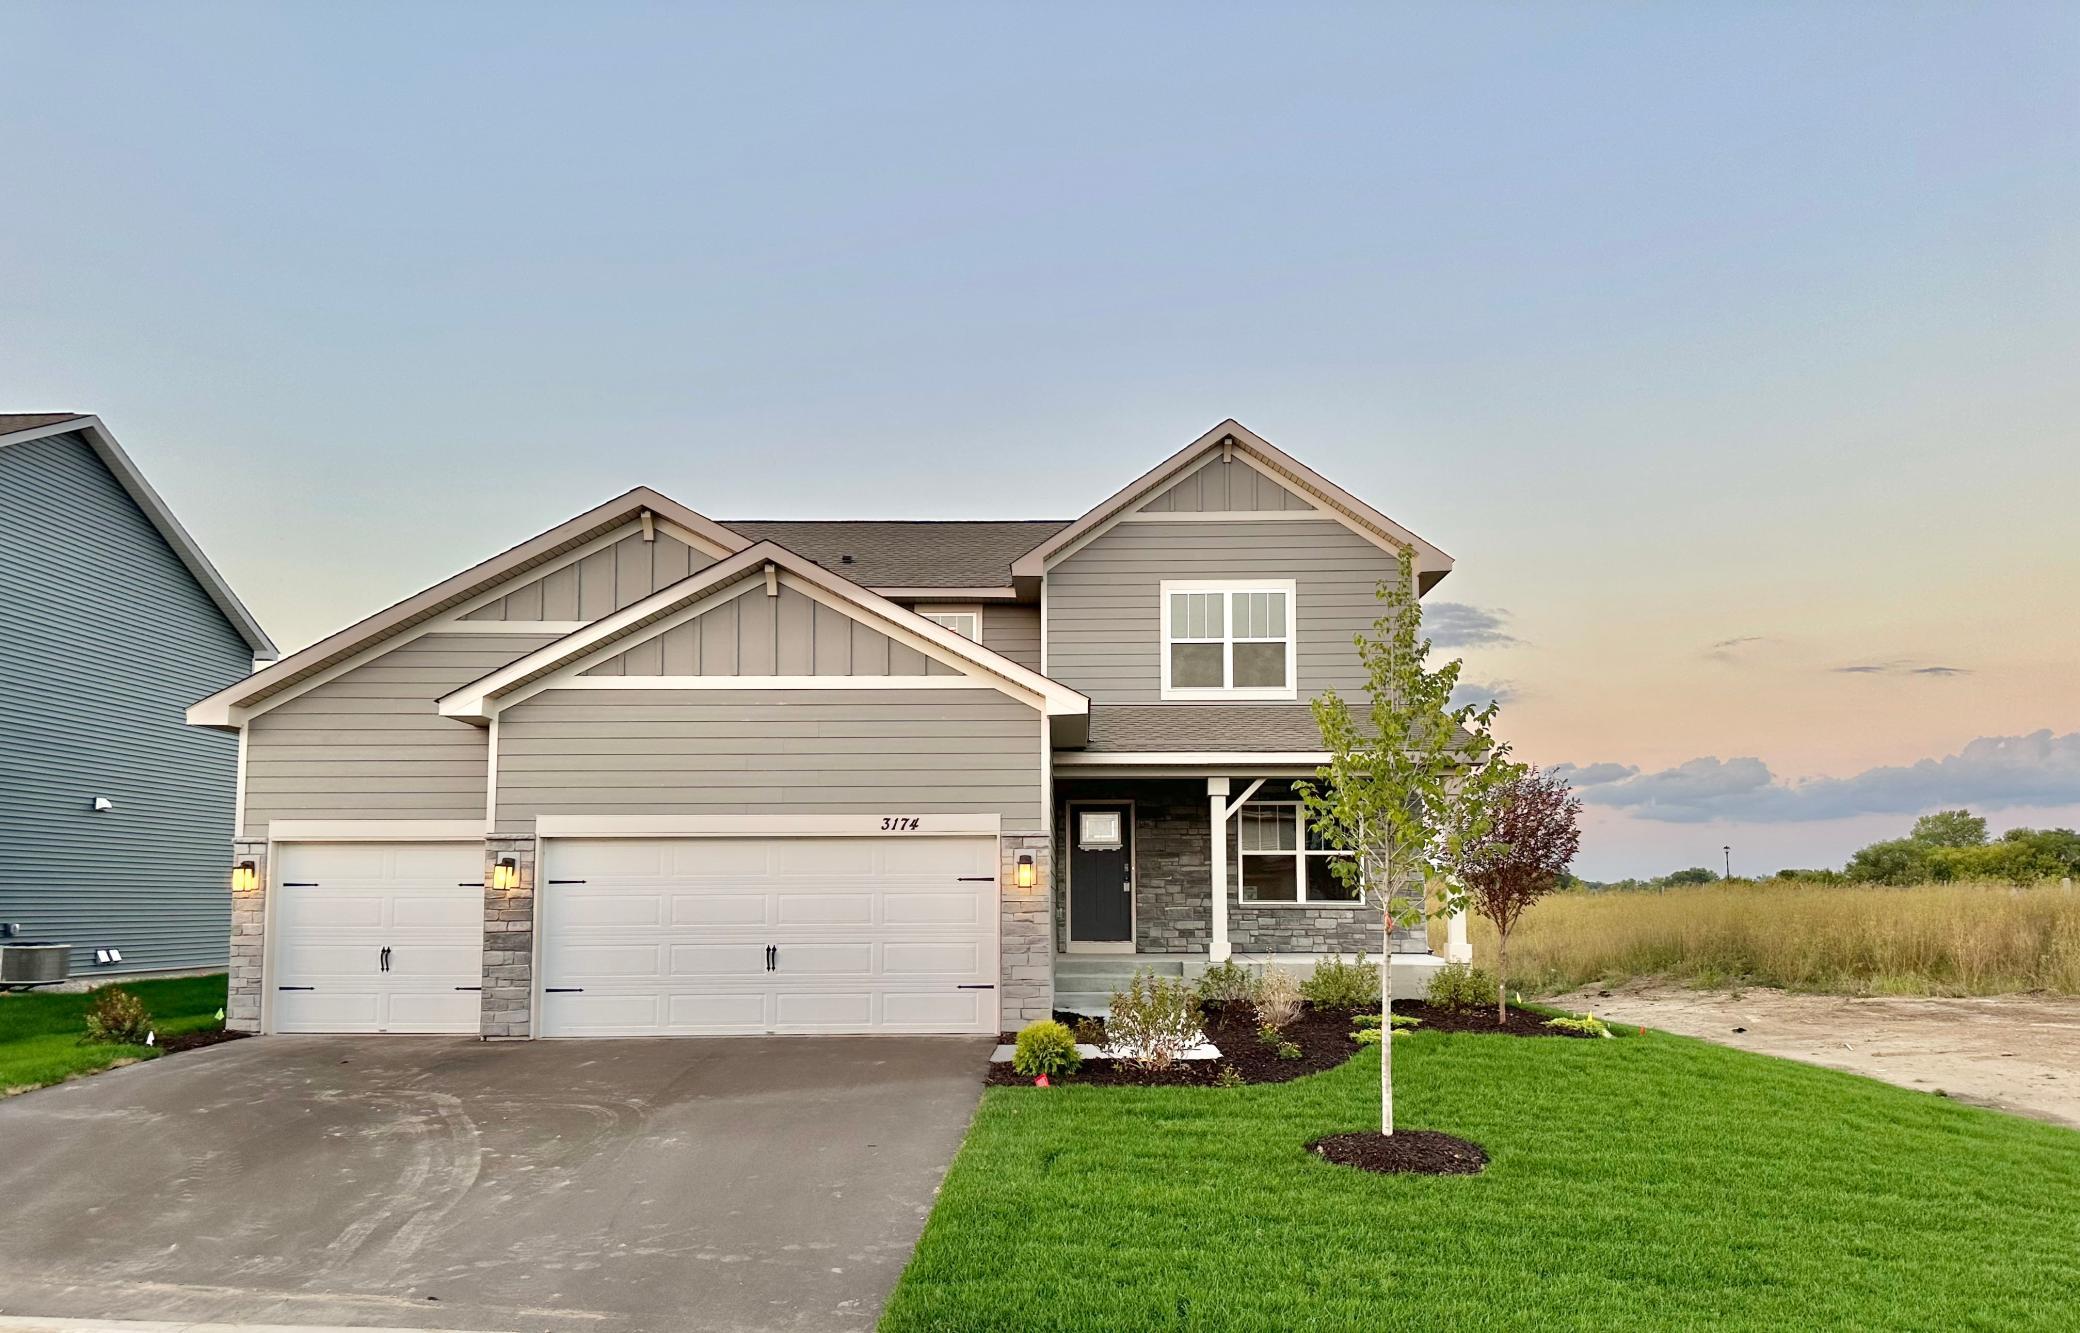 Welcome to 3174 Sunshine Curve! This Grant home, which includes full sodded yard, Smart irrigation and landscaping! Ready to move-in and call home now!